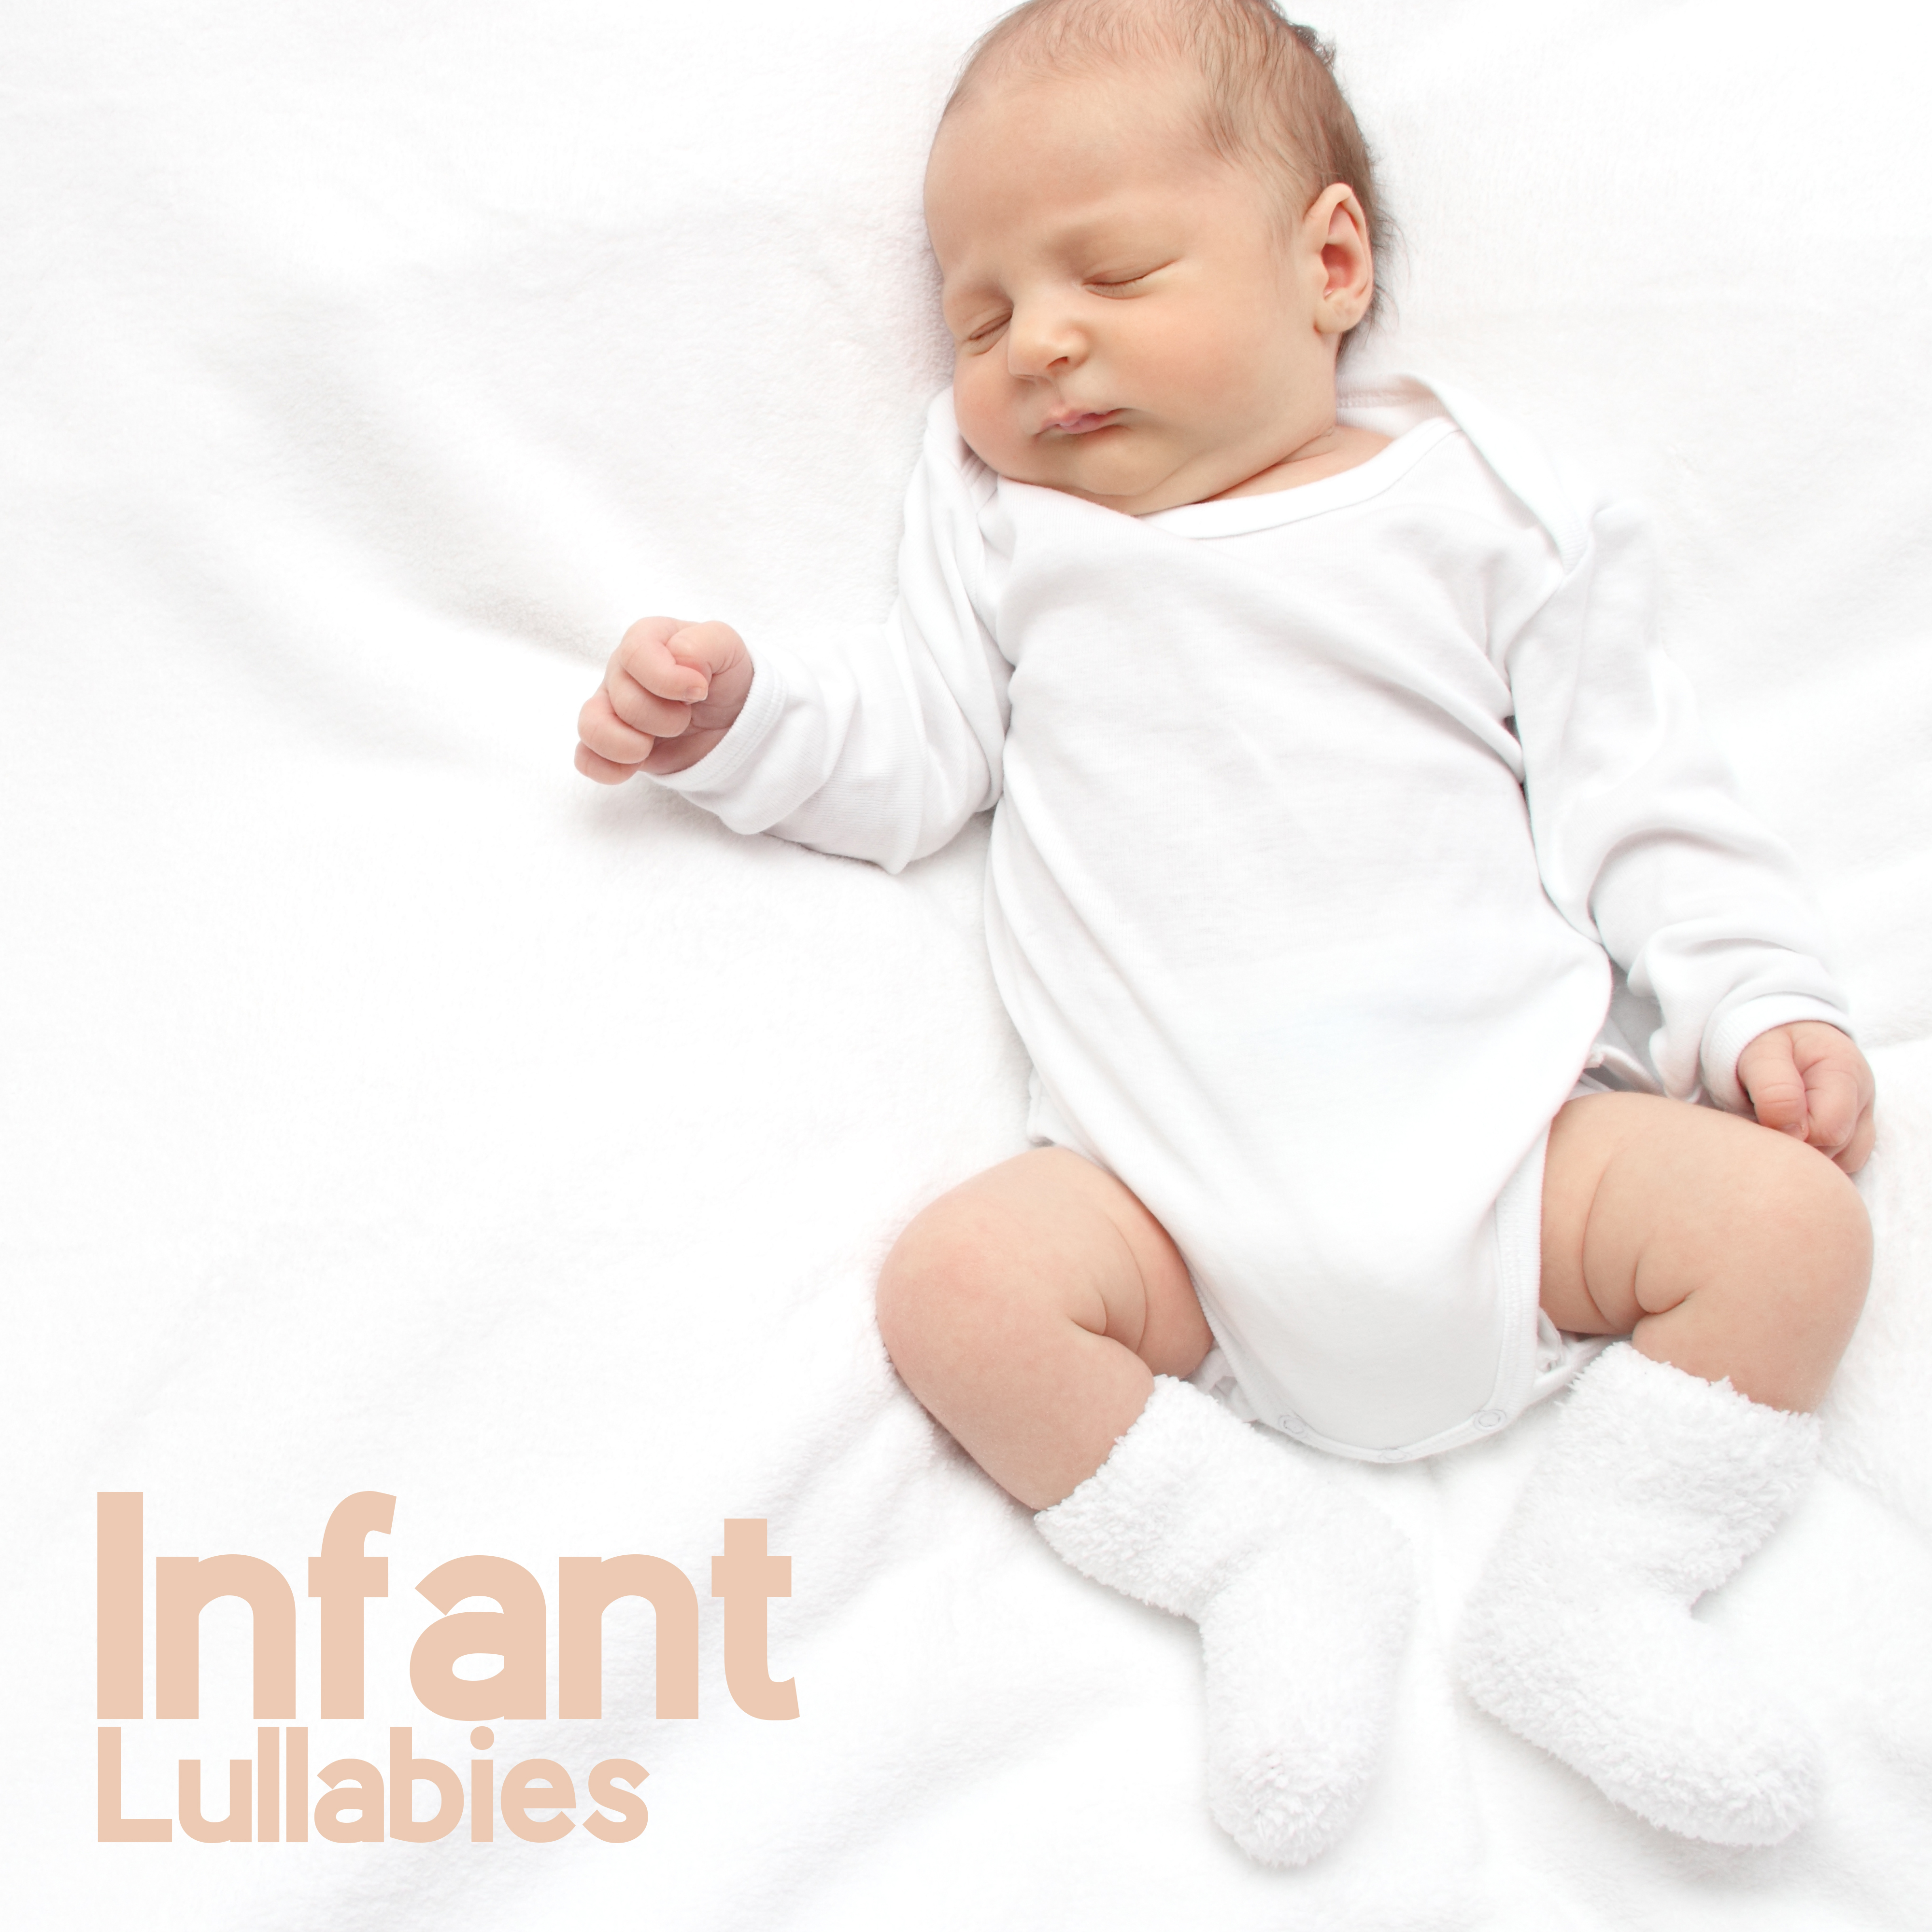 Infant Lullabies: Baby-Friendly Music for Sleep and Naps